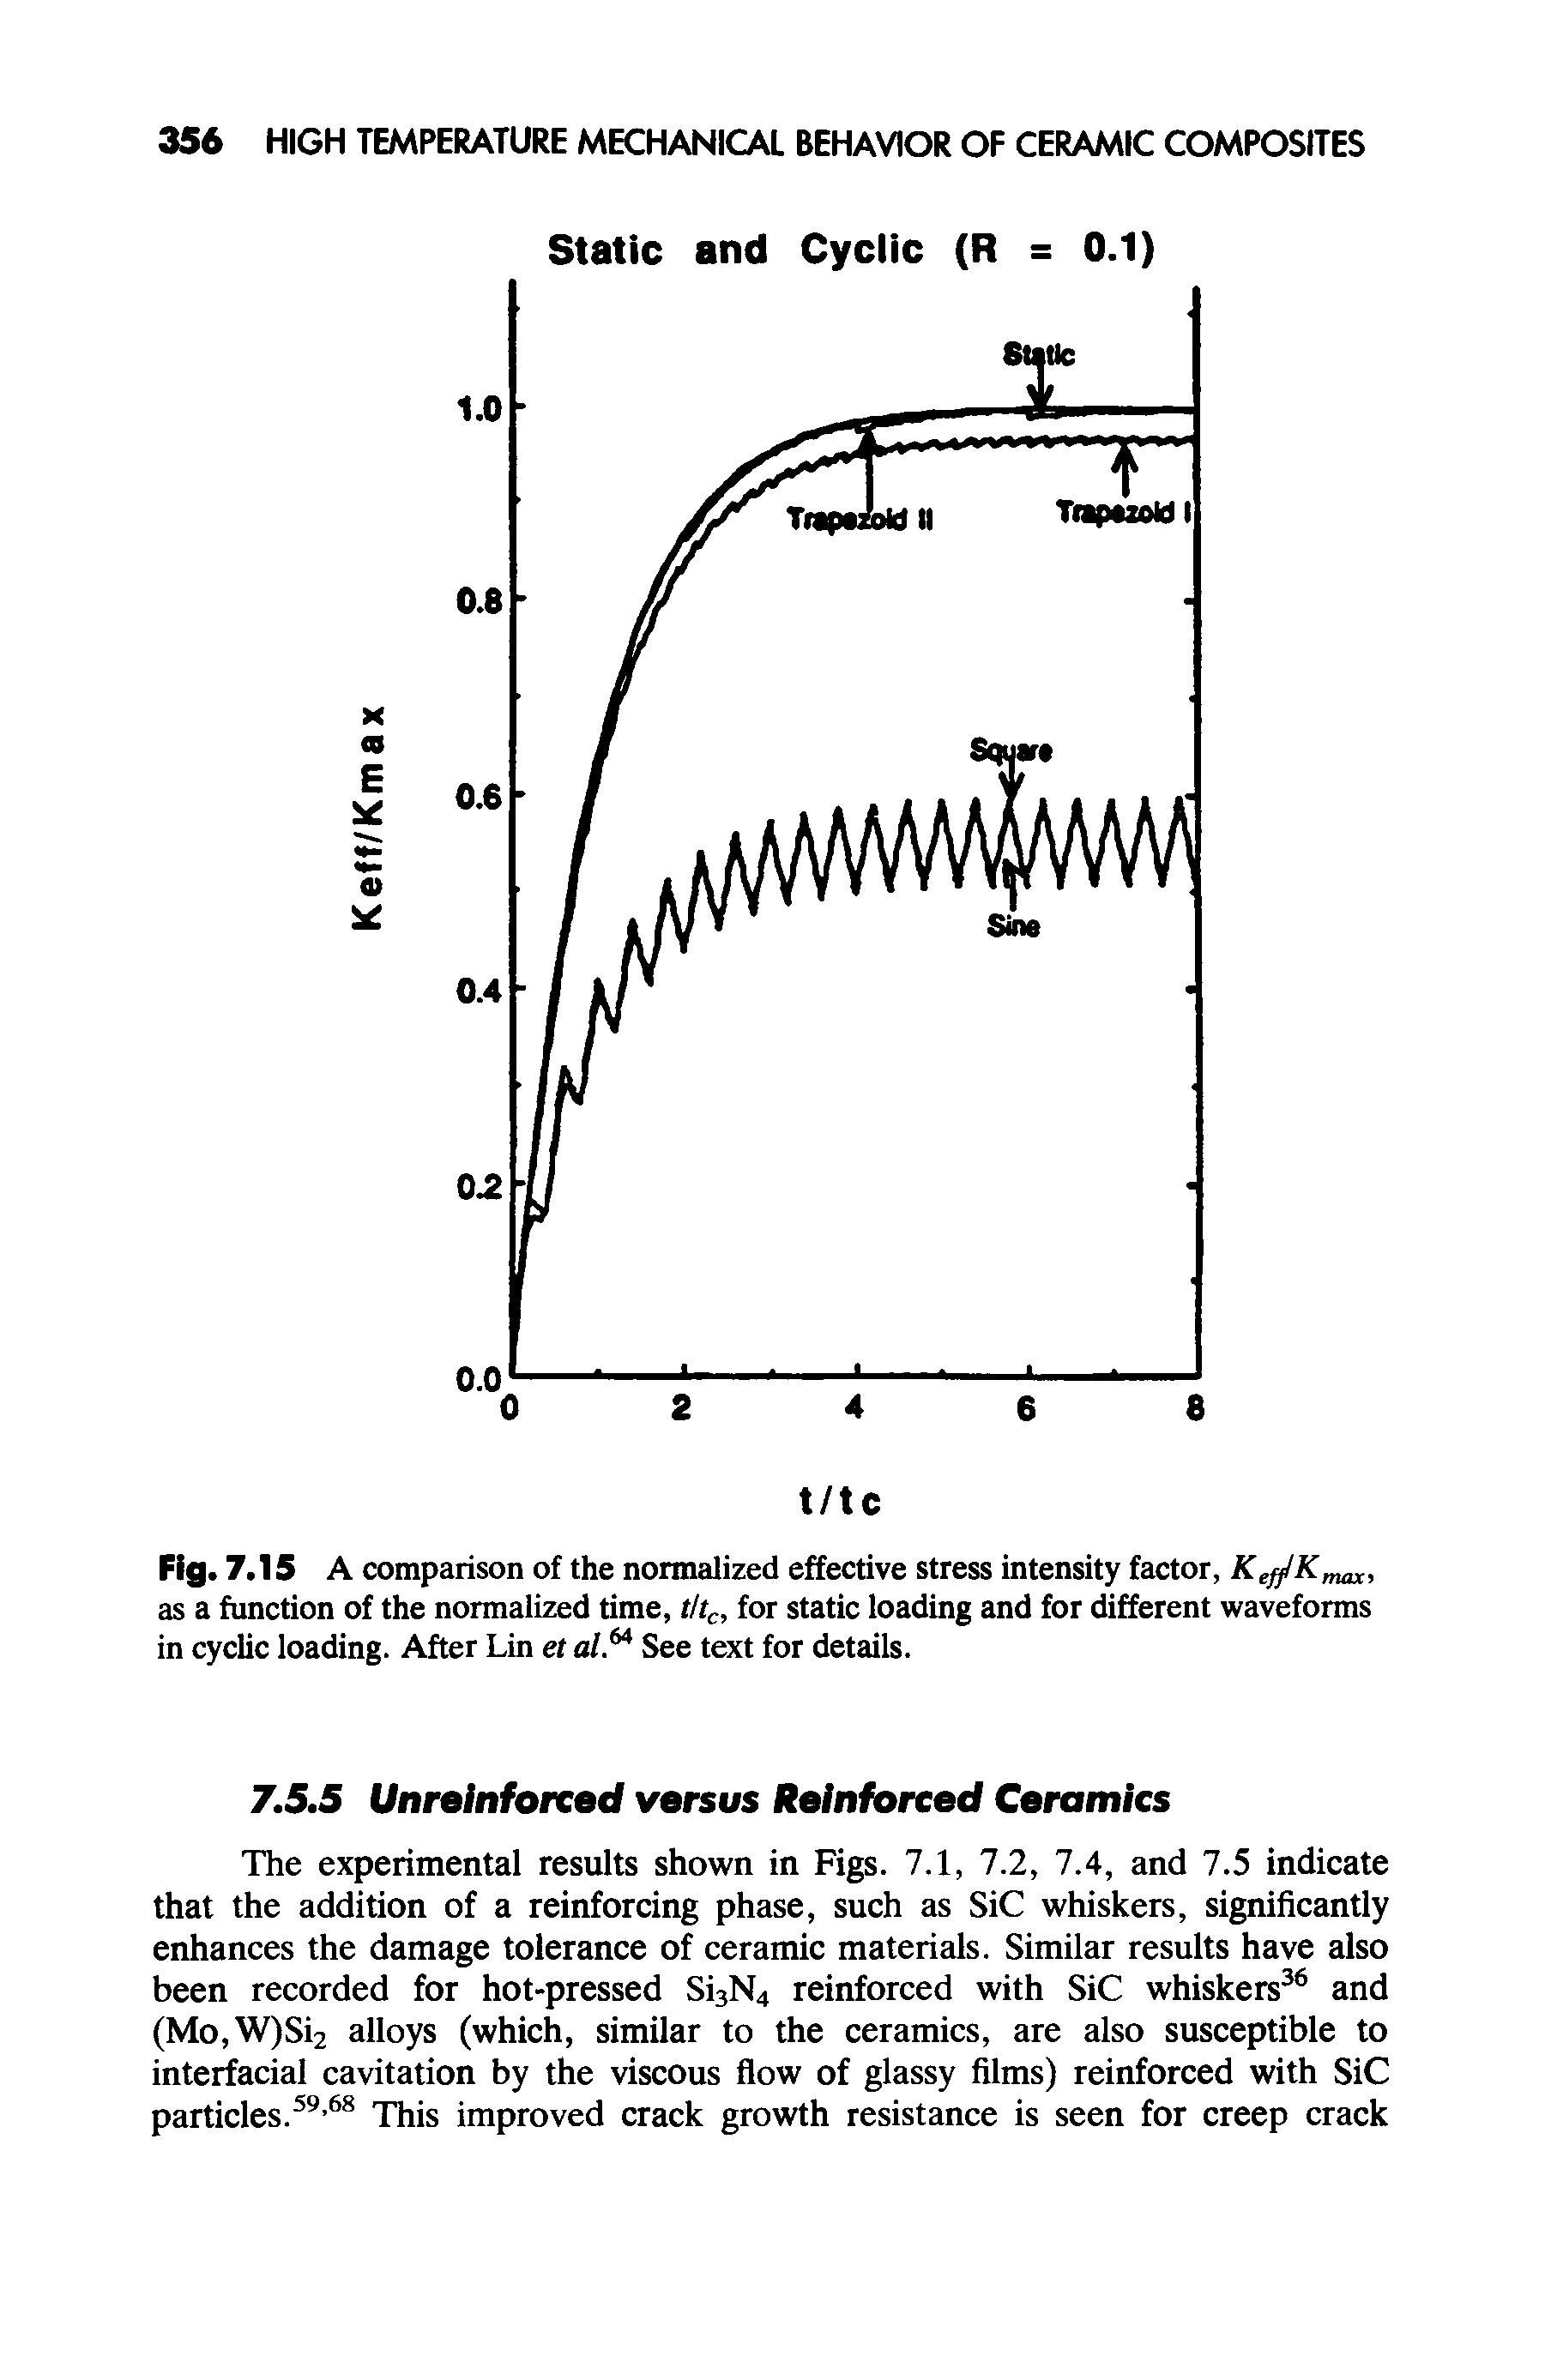 Fig. 7.15 A comparison of the normalized effective stress intensity factor, Ke K, as a function of the normalized time, tltc, for static loading and for different waveforms in cyclic loading. After Lin et al.M See text for details.